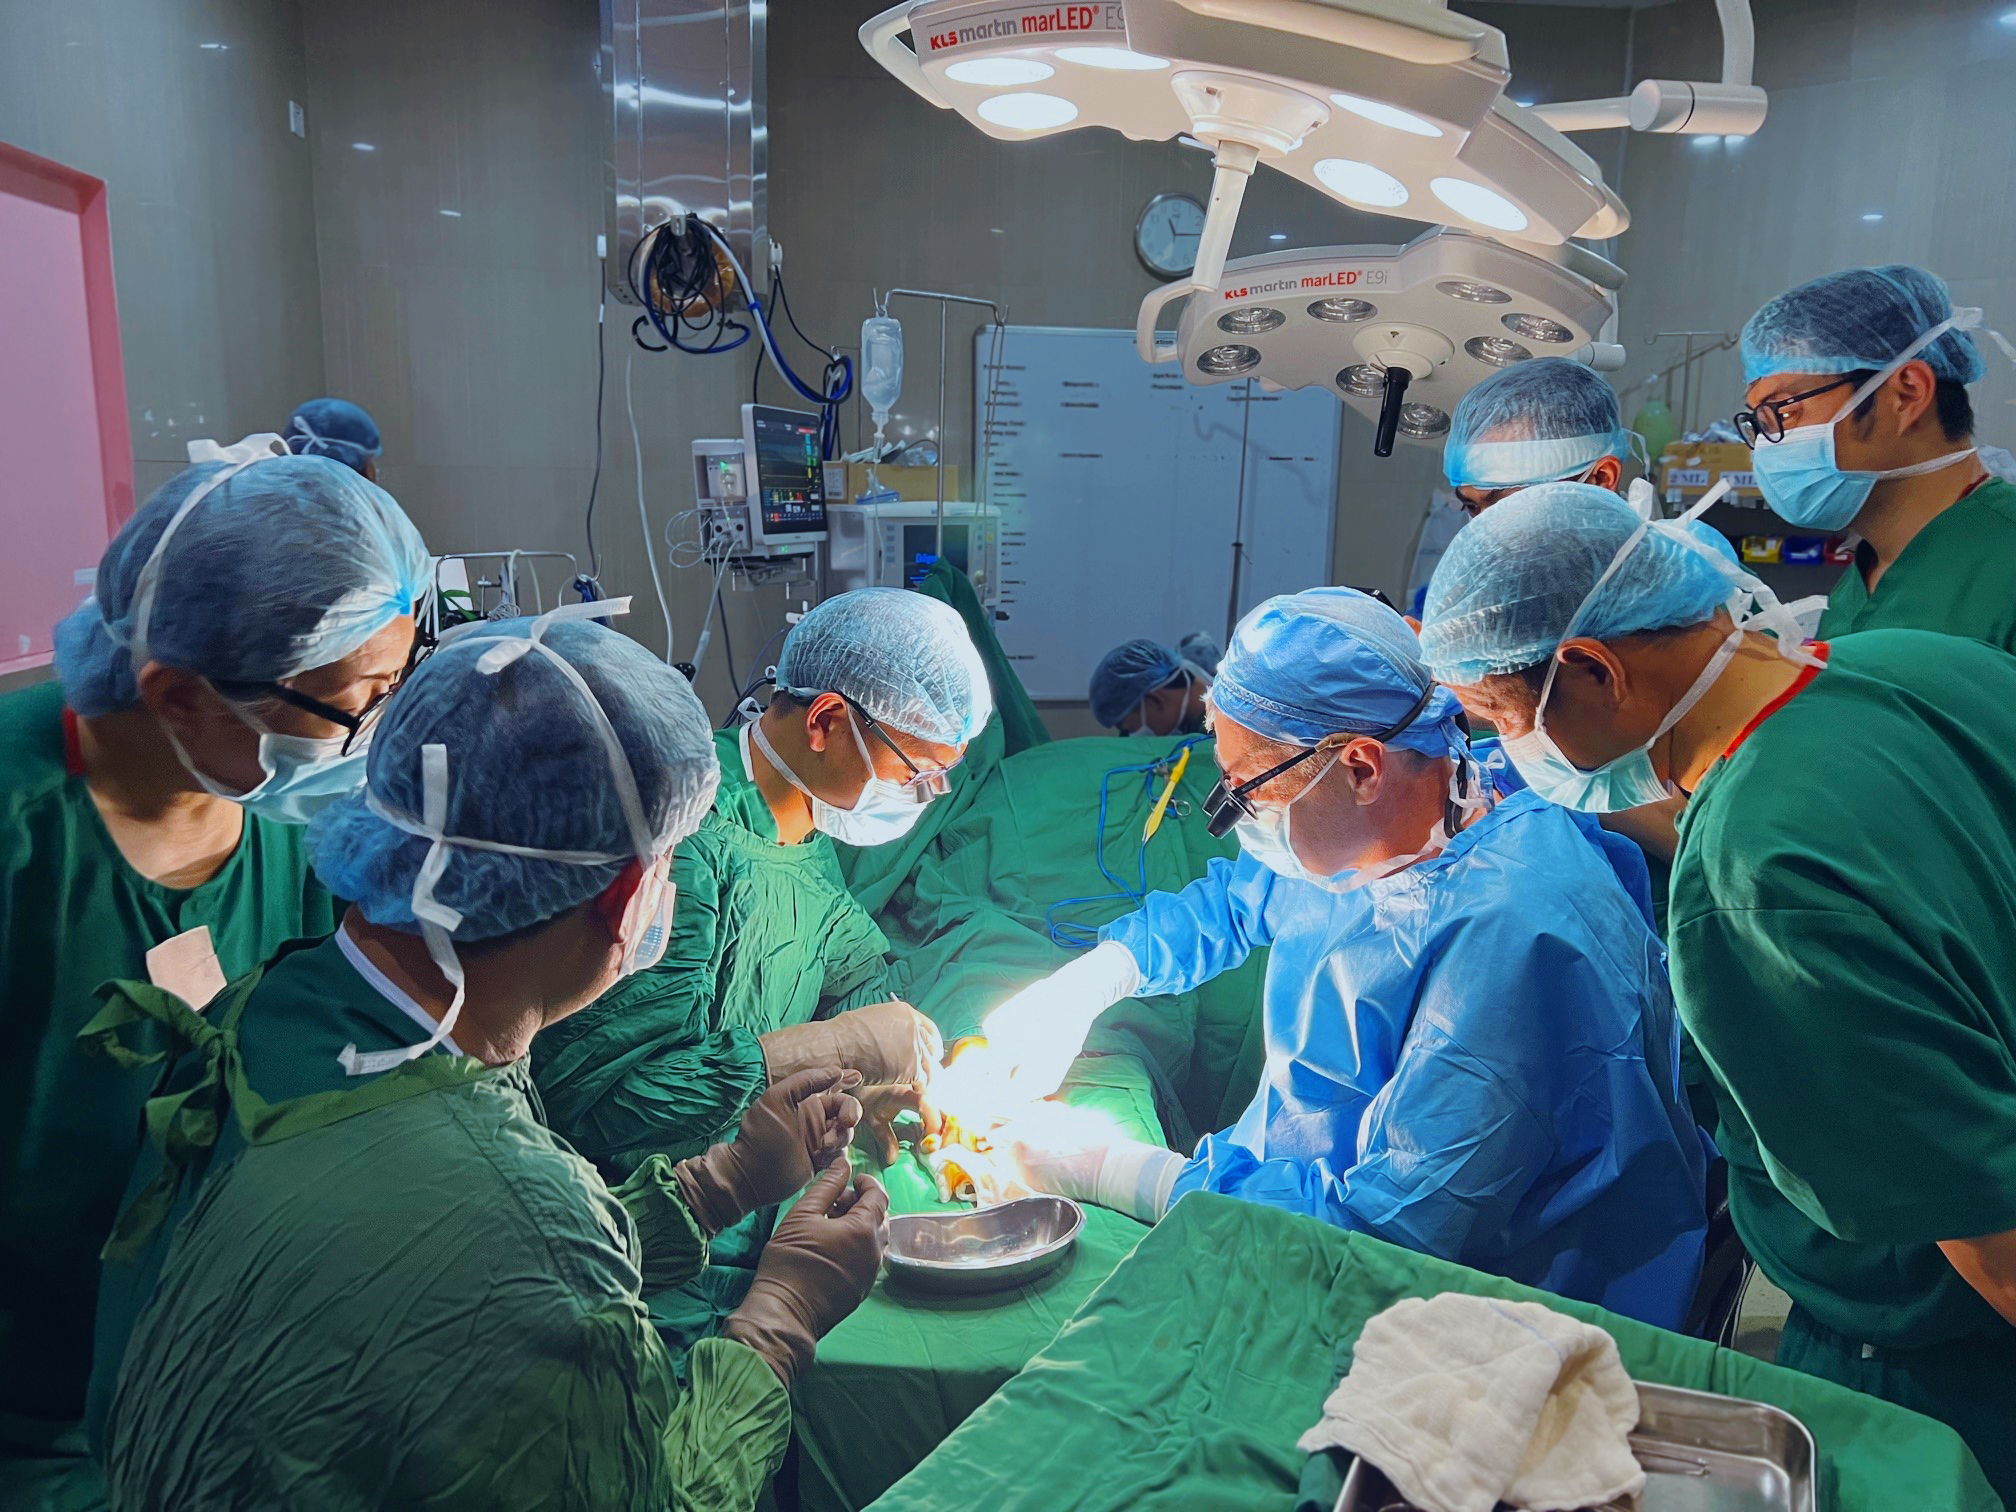 Two surgeons are supported by a team of at least 5 other people to operate on an unseen patient.